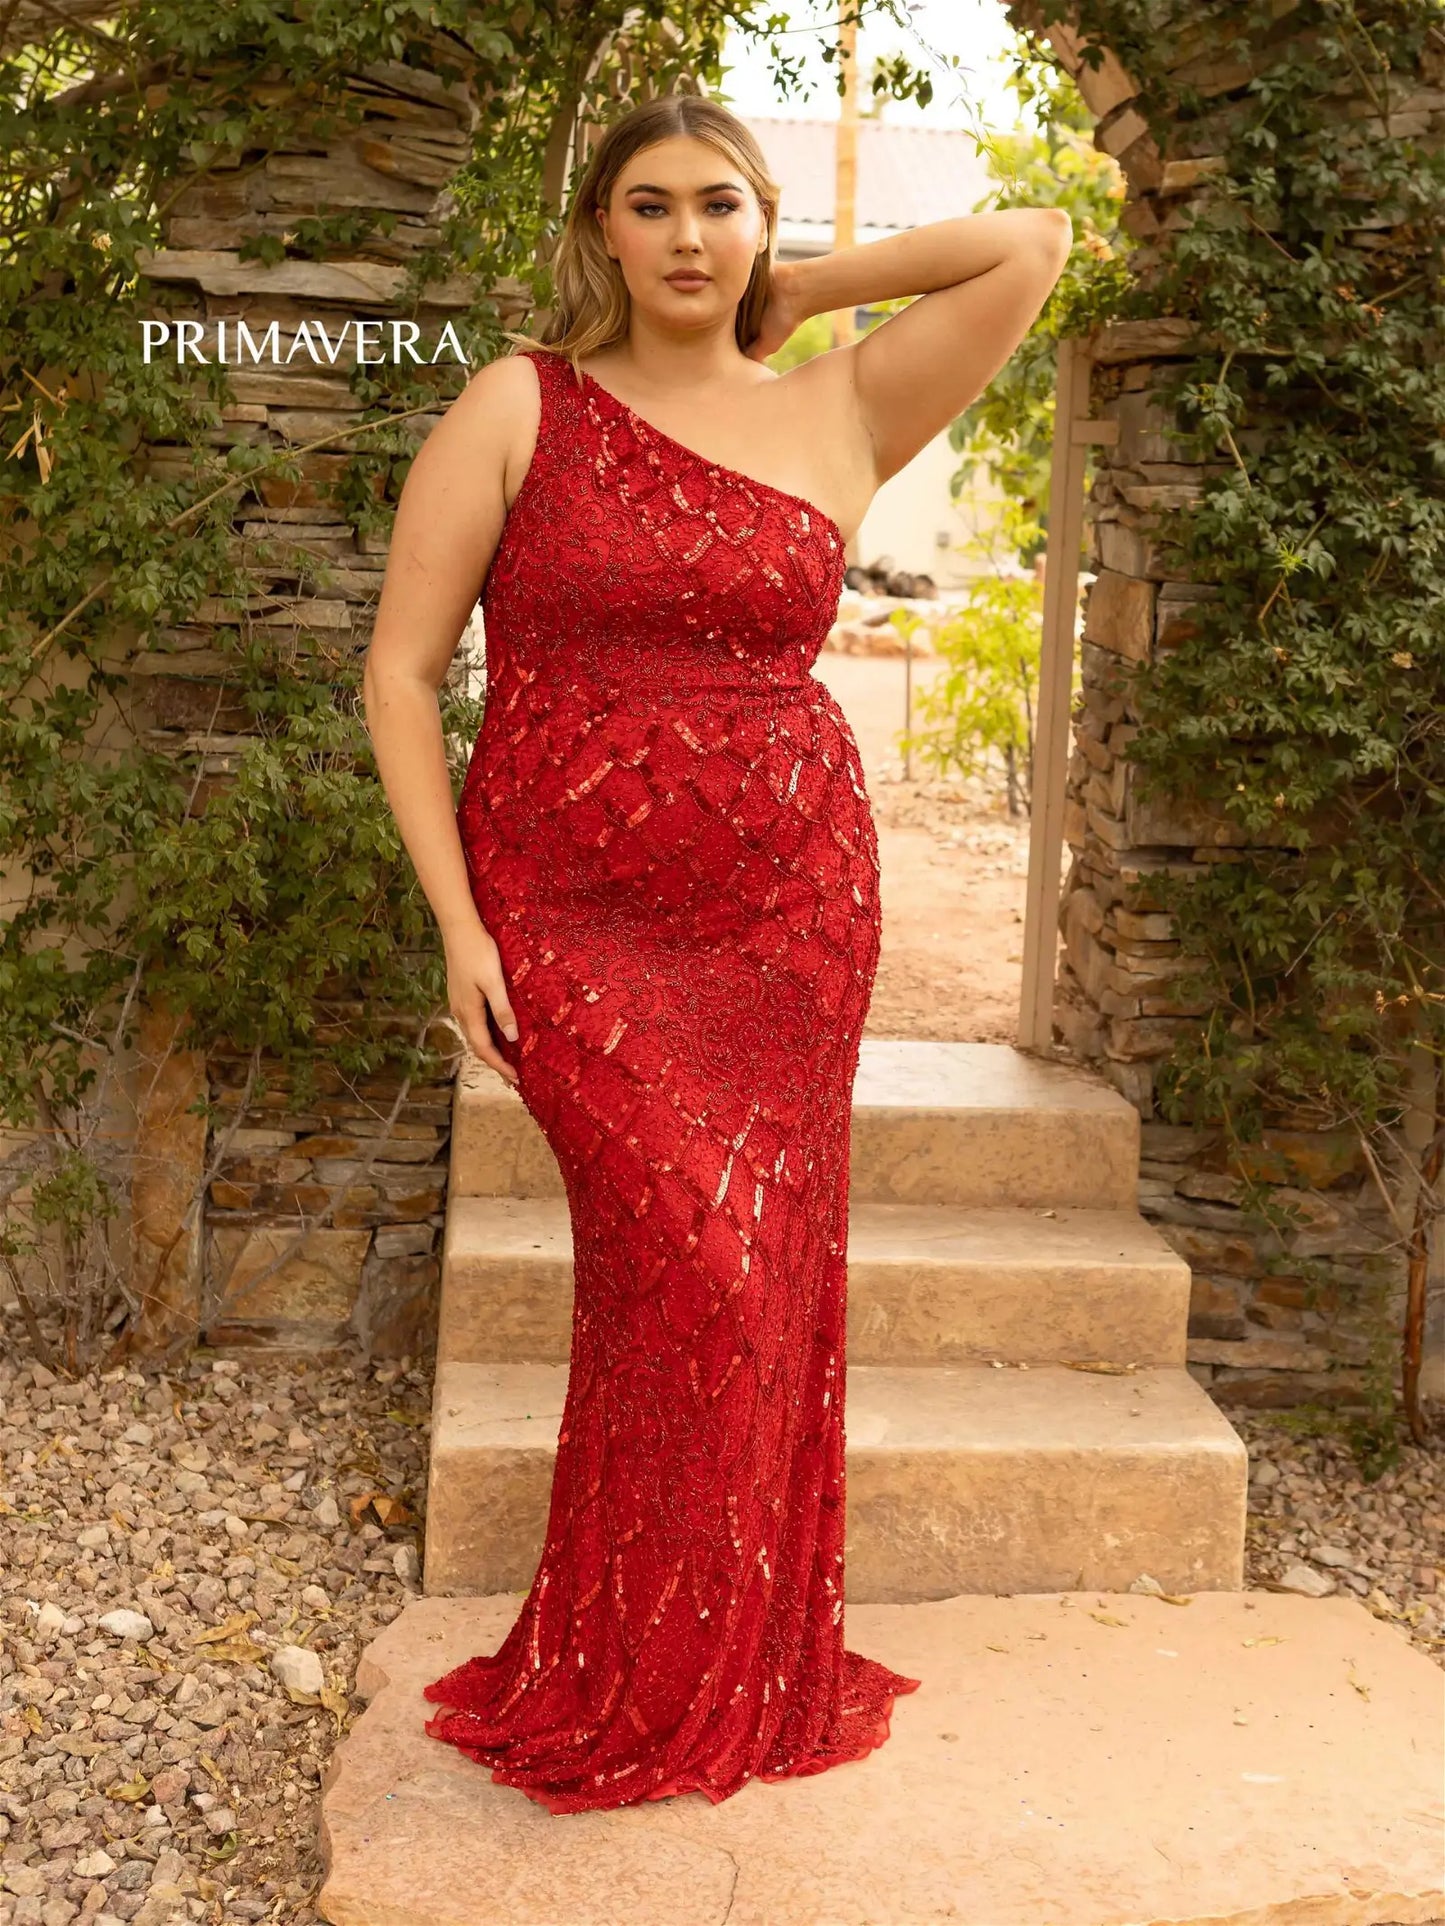 Primavera Couture 14002 Long Beaded Sequin Plus Size One Shoulder Prom Dress Formal Gown Curvy  Sizes: 14-24  Colors: LIGHT TURQUOISE, NEON PINK, ROYAL BLUE, BLACK, RED